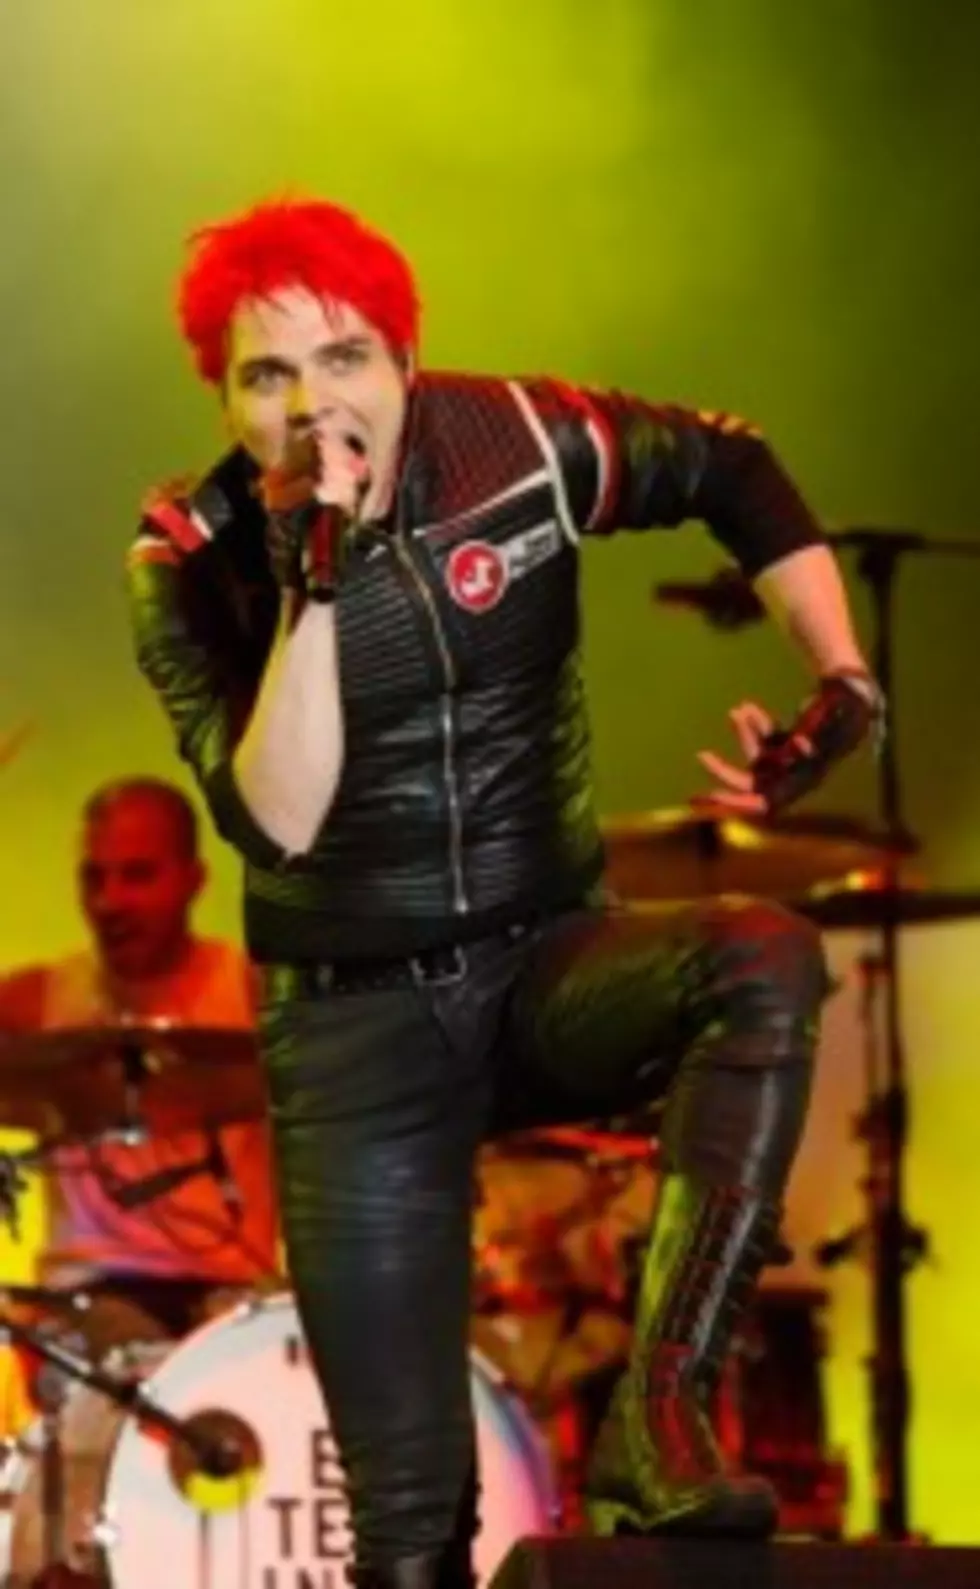 My Chemical Romance Gives Drummer the Boot [PIC]